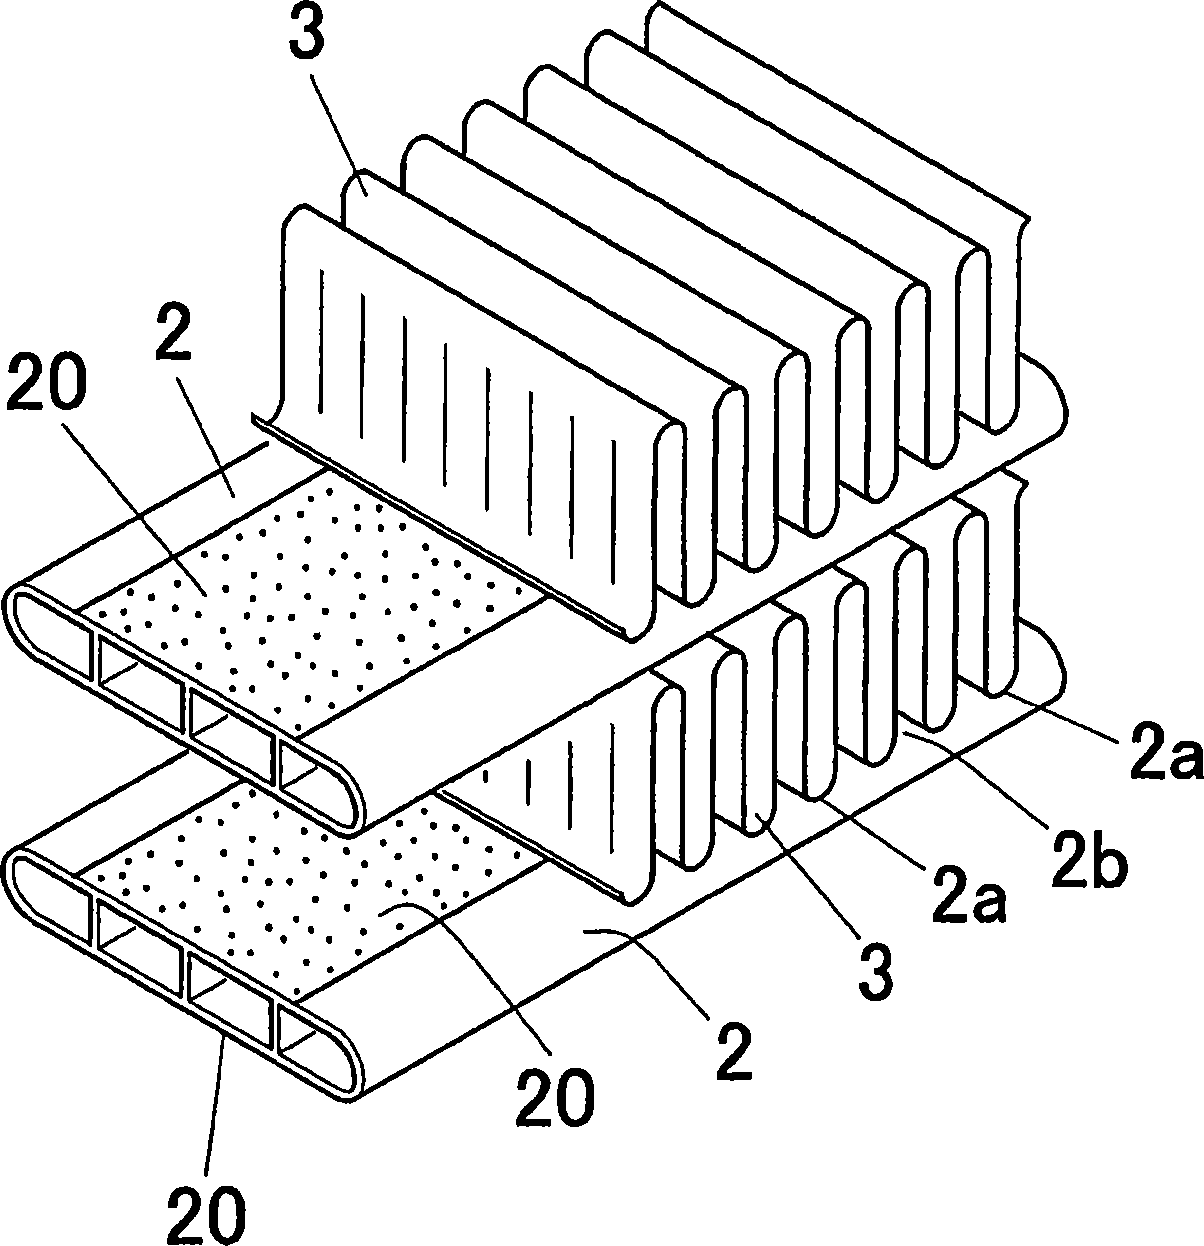 Heat exchanger, method for manufacturing the same, and heat exchanging tube